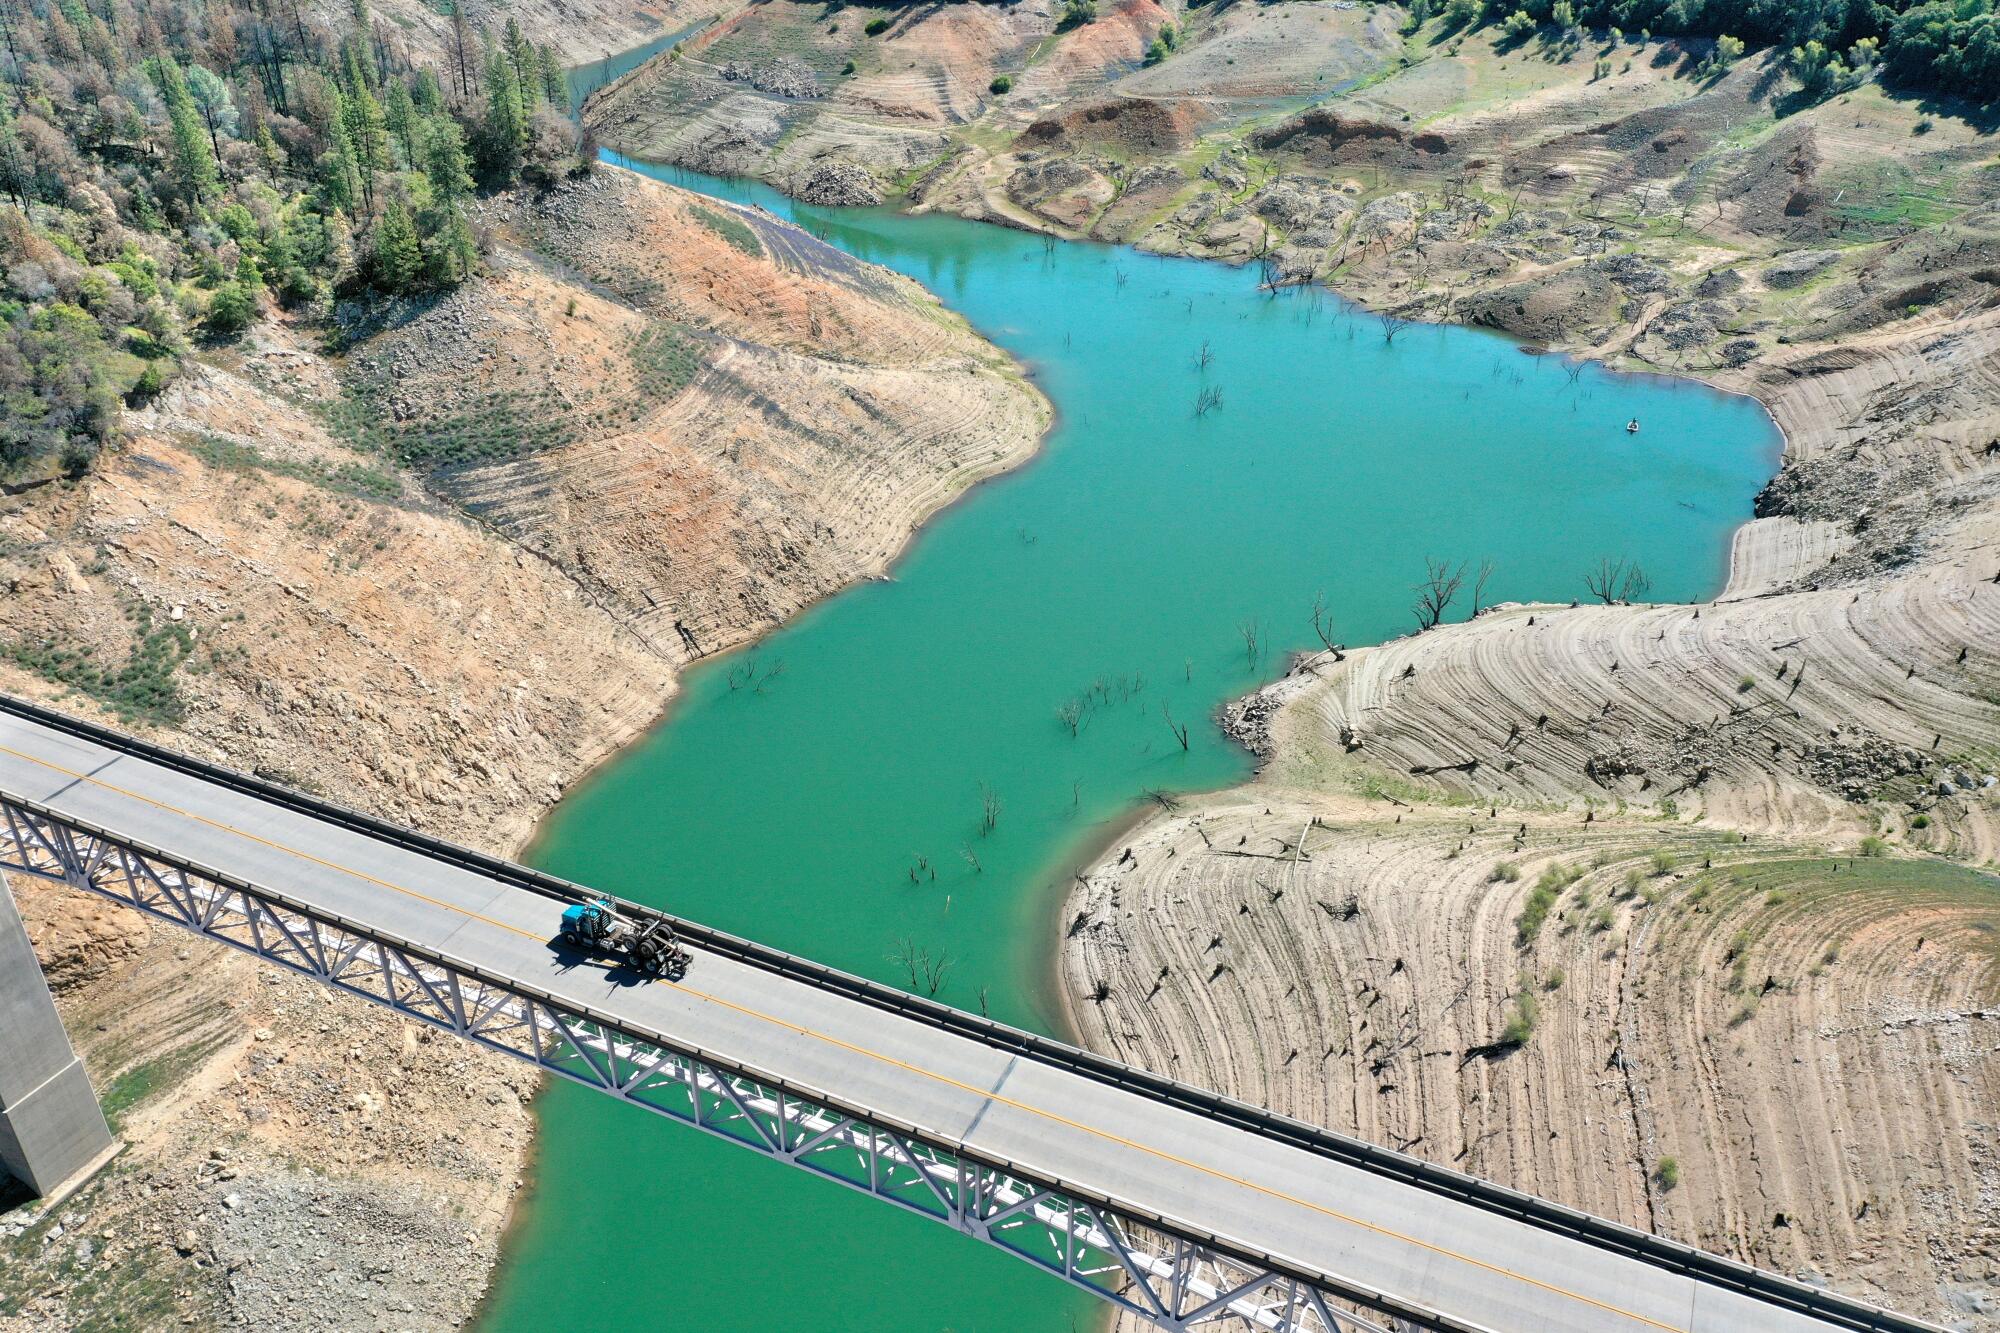 In an aerial view, a truck drives on the Enterprise Bridge over a section of Lake Oroville